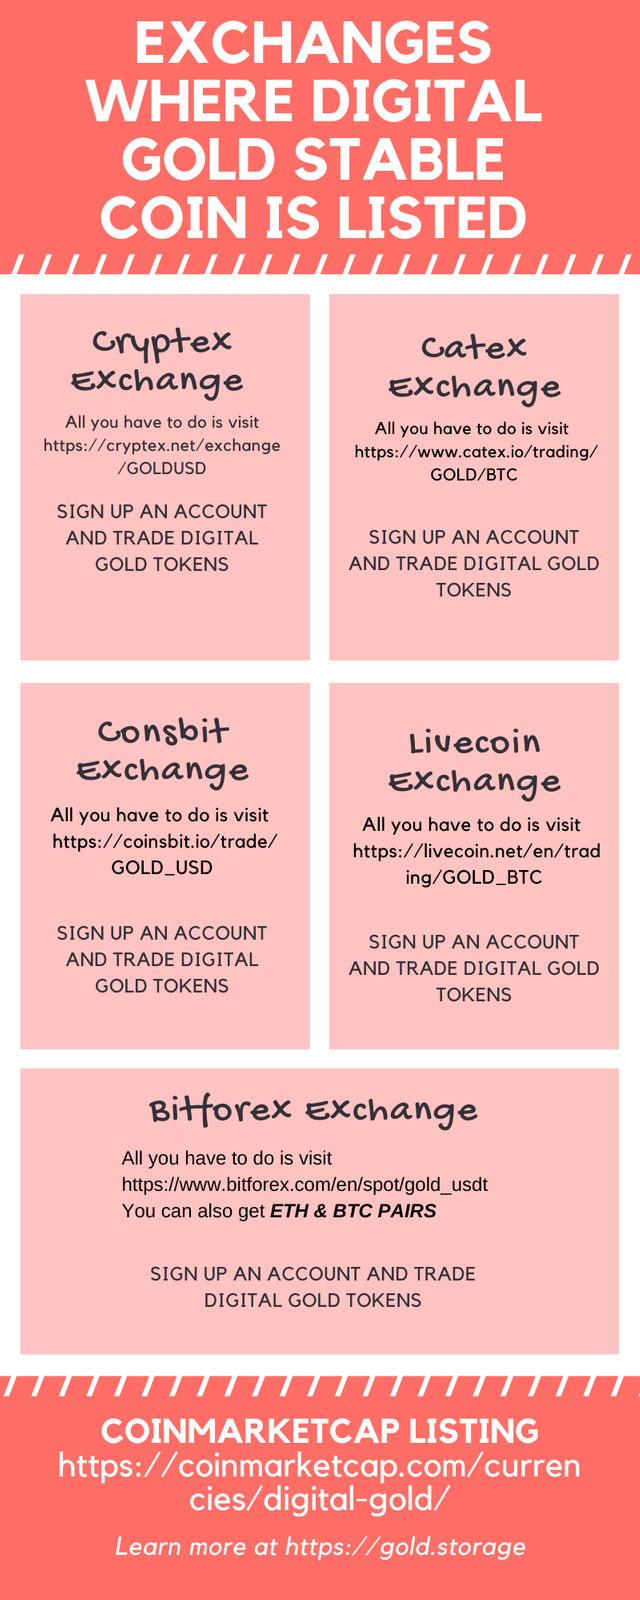 EXCHANGES WHERE DIGITAL GOLD STABLE COIN IS LISTED.png